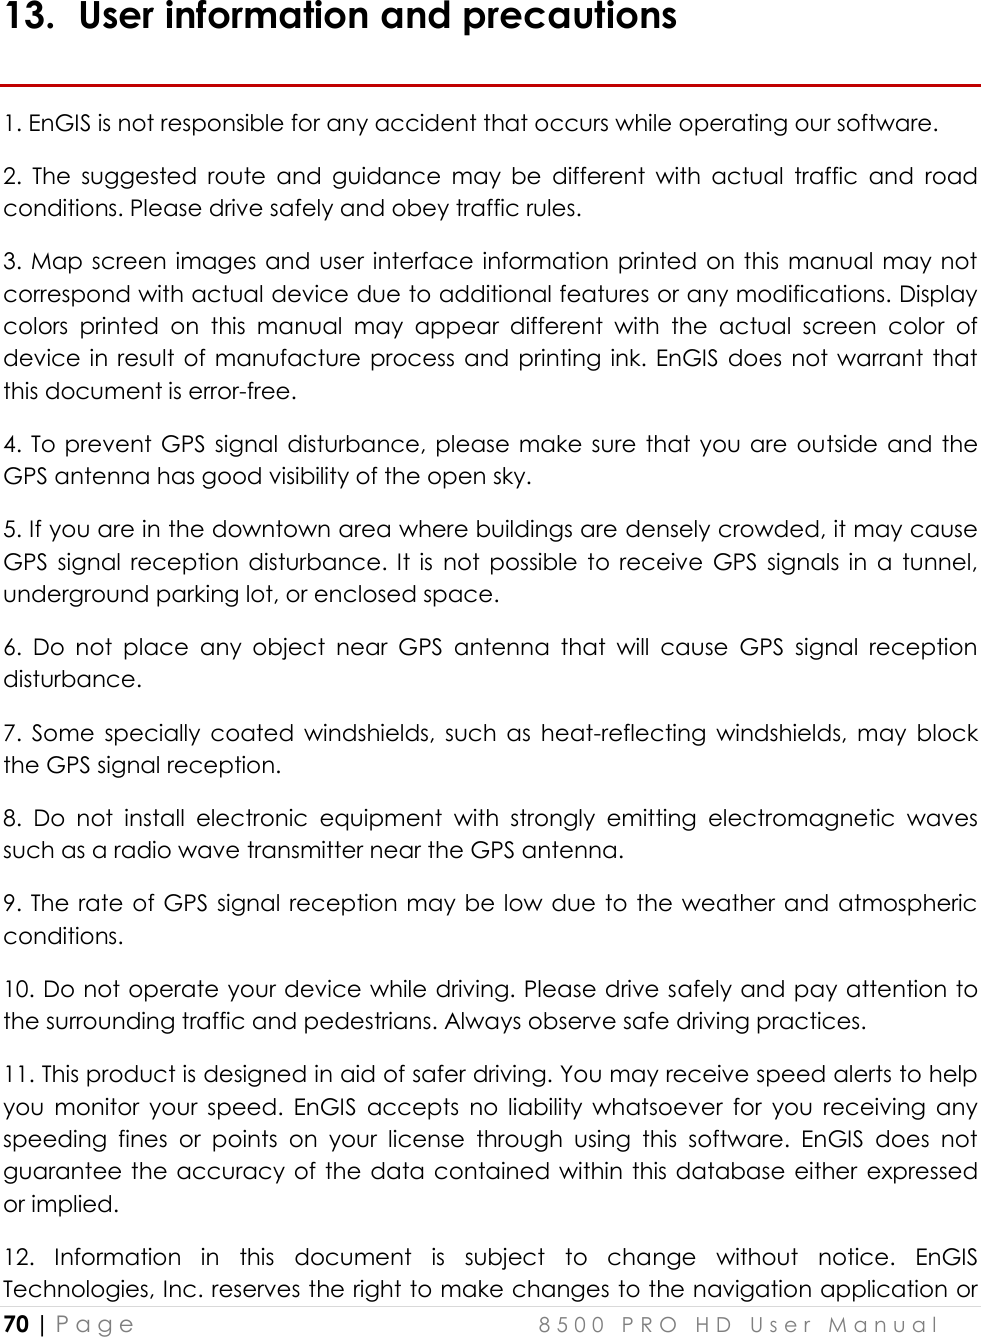  70 | P a g e    8 5 0 0   P R O   H D   U s e r   M a n u a l   13. User information and precautions 1. EnGIS is not responsible for any accident that occurs while operating our software.  2.  The  suggested  route  and  guidance  may  be  different  with  actual  traffic  and  road conditions. Please drive safely and obey traffic rules. 3. Map screen images and user  interface information printed on this manual may not correspond with actual device due to additional features or any modifications. Display colors  printed  on  this  manual  may  appear  different  with  the  actual  screen  color  of device in result of manufacture process and printing ink. EnGIS  does not  warrant  that this document is error-free. 4. To  prevent GPS signal disturbance, please make sure  that  you  are  outside and  the GPS antenna has good visibility of the open sky. 5. If you are in the downtown area where buildings are densely crowded, it may cause GPS  signal  reception  disturbance. It  is  not  possible  to  receive  GPS  signals  in  a  tunnel, underground parking lot, or enclosed space. 6.  Do  not  place  any  object  near  GPS  antenna  that  will  cause  GPS  signal  reception disturbance.  7.  Some  specially  coated  windshields,  such  as  heat-reflecting  windshields,  may  block the GPS signal reception. 8.  Do  not  install  electronic  equipment  with  strongly  emitting  electromagnetic  waves such as a radio wave transmitter near the GPS antenna.  9. The rate of  GPS signal reception may be low due to the weather  and atmospheric conditions. 10. Do not operate your device while driving. Please drive safely and pay attention to the surrounding traffic and pedestrians. Always observe safe driving practices. 11. This product is designed in aid of safer driving. You may receive speed alerts to help you  monitor  your  speed.  EnGIS  accepts  no  liability  whatsoever  for  you  receiving  any speeding  fines  or  points  on  your  license  through  using  this  software.  EnGIS  does  not guarantee the accuracy of the  data contained within this database either  expressed or implied. 12.  Information  in  this  document  is  subject  to  change  without  notice.  EnGIS Technologies, Inc. reserves the right to make changes to the navigation application or 